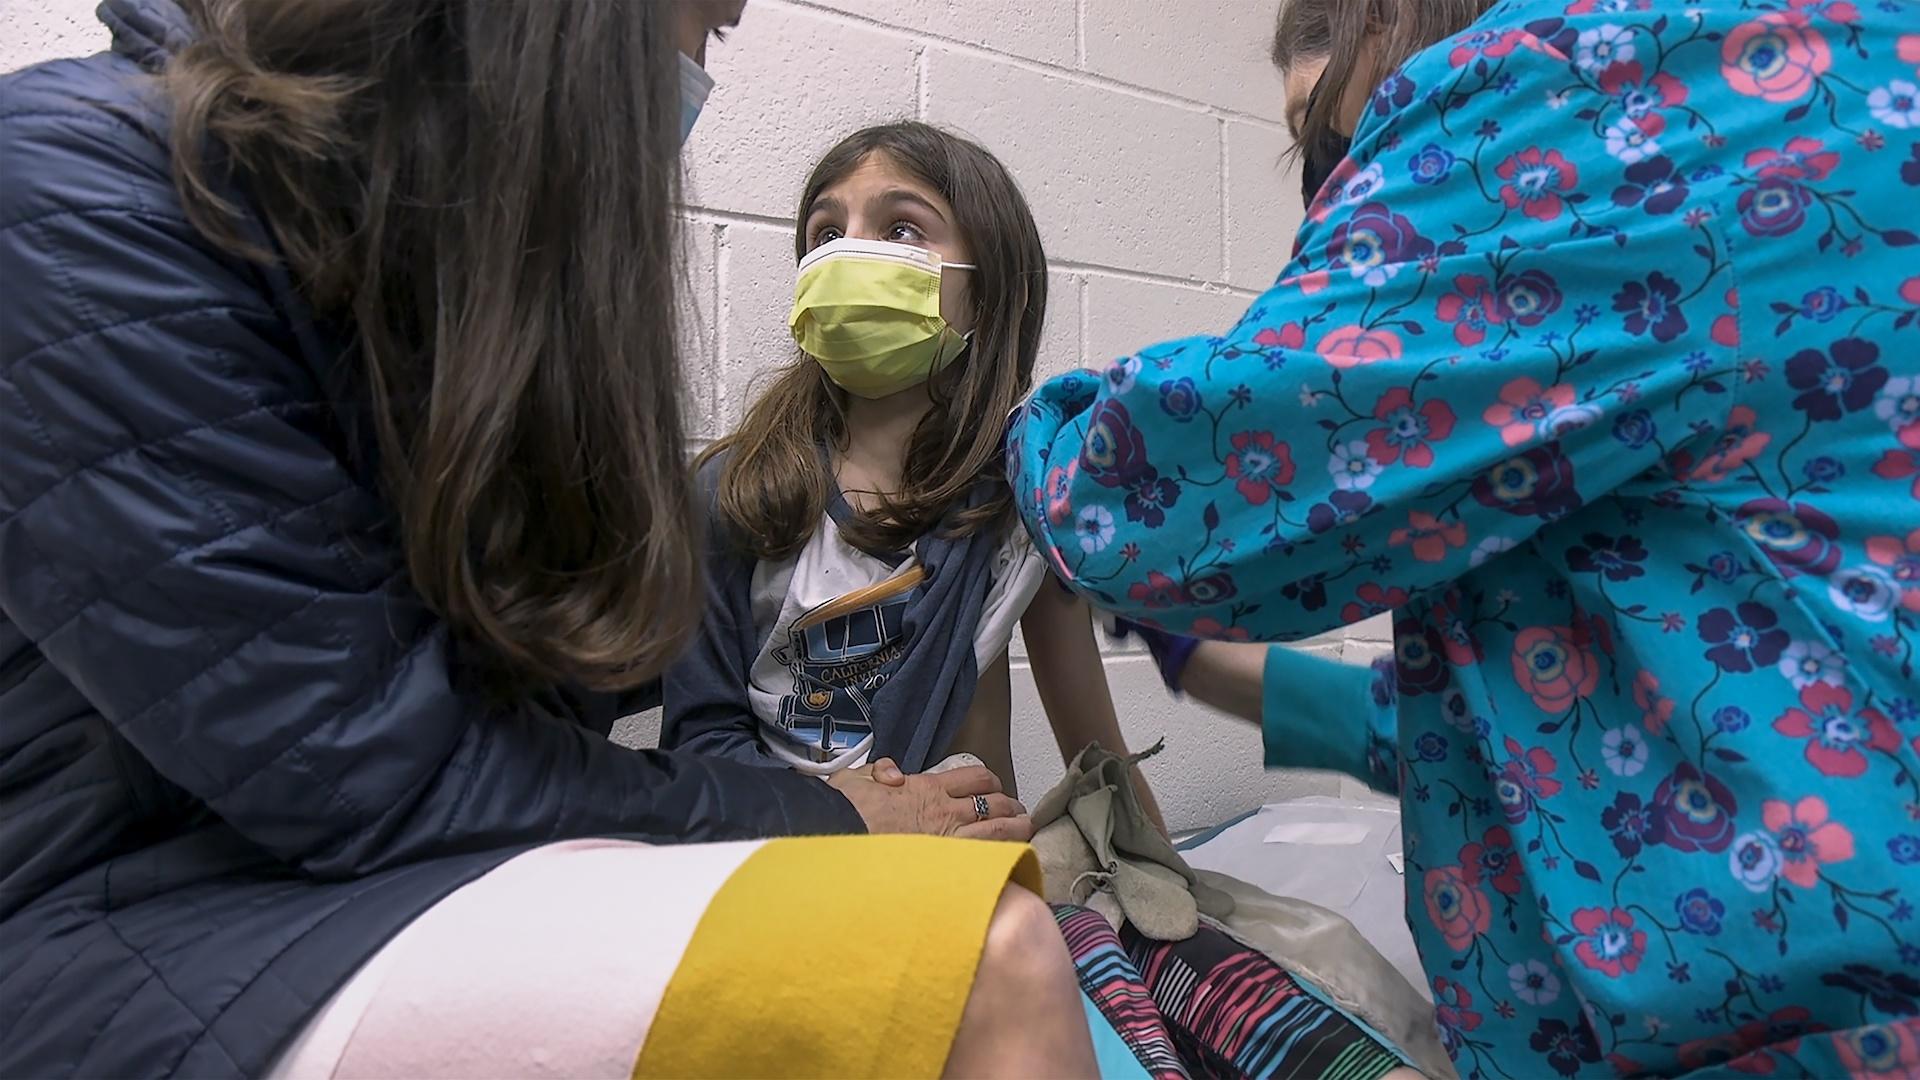 In this Wednesday, March 24, 2021 image from video provided by Duke Health, Alejandra Gerardo, 9, looks up to her mom, Dr. Susanna Naggie, as she gets the first of two Pfizer COVID-19 vaccinations during a clinical trial for children at Duke Health in Durham, N.C. (Shawn Rocco/Duke Health via AP)